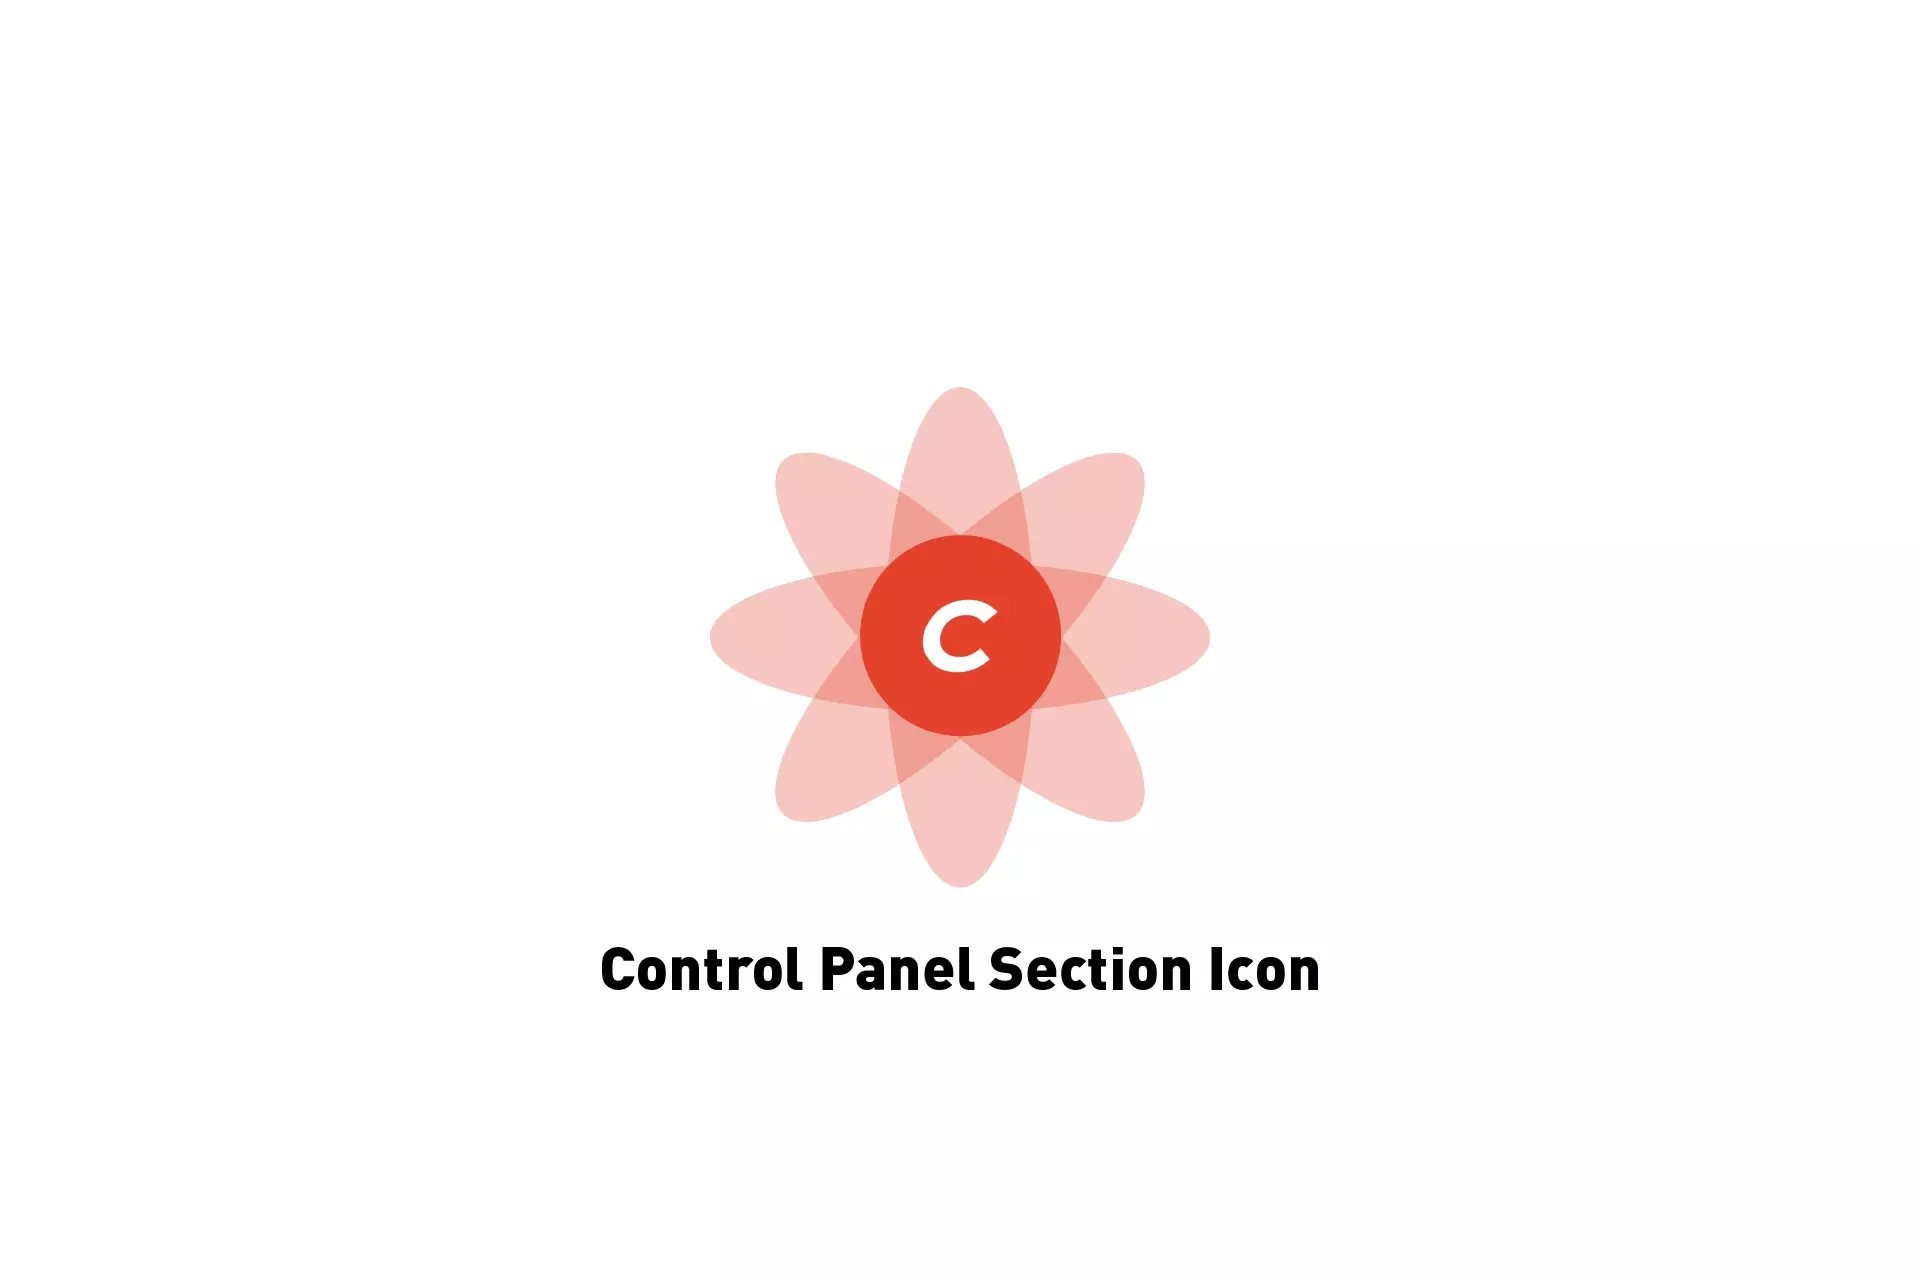 A flower that represents Craft CMS with the text "Control Panel Section Icon" beneath it.